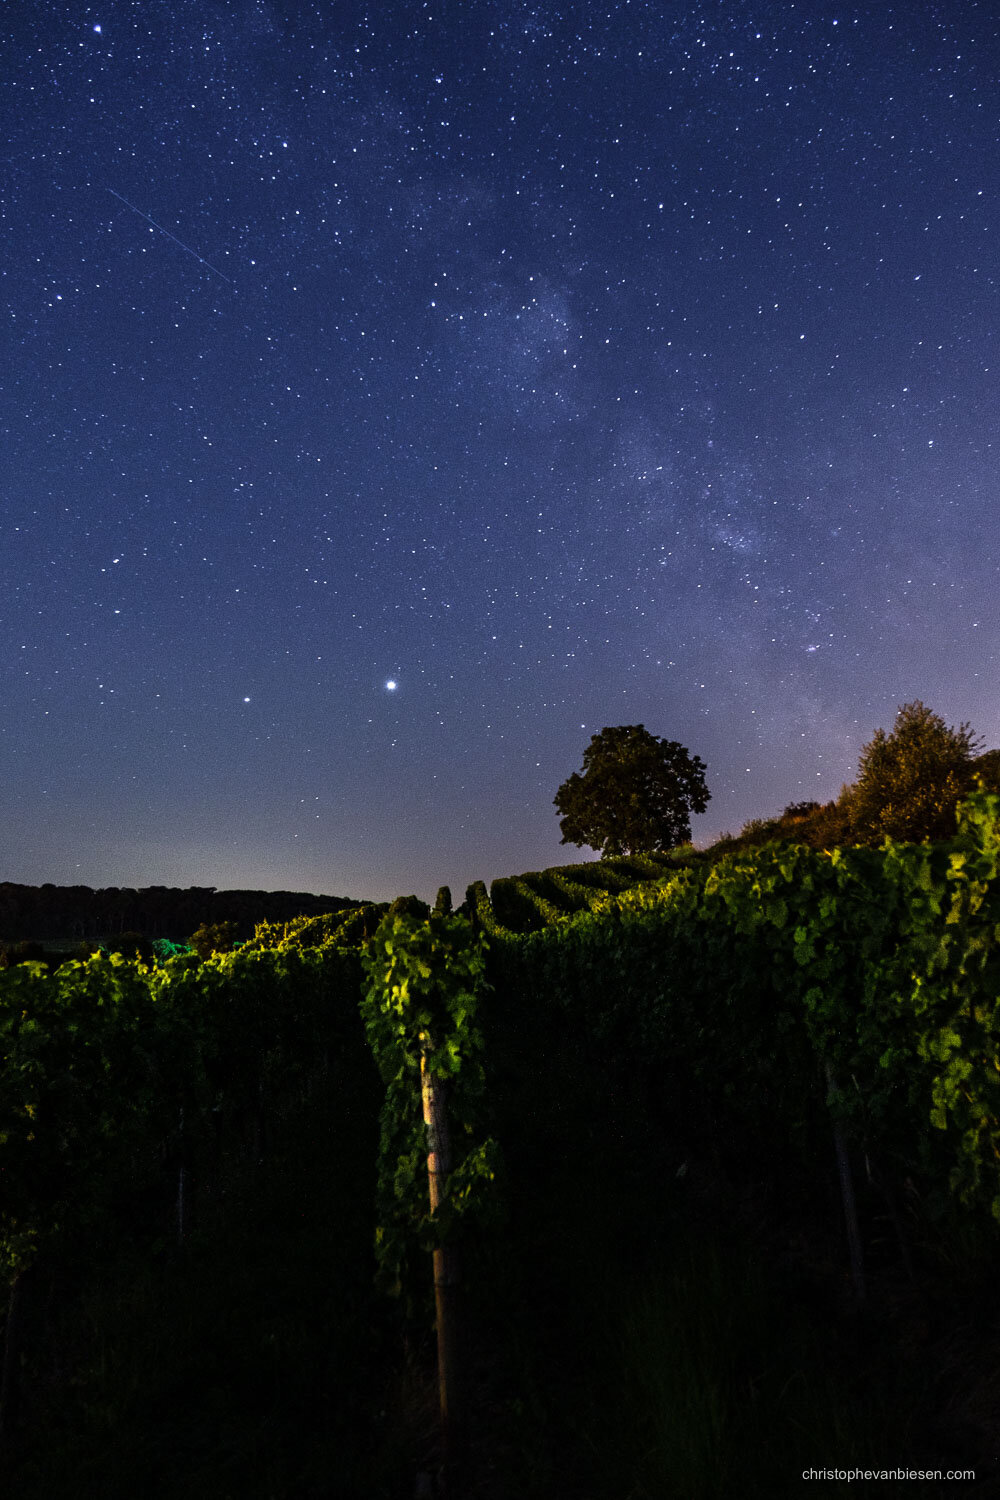 Milky Way - Visit Luxembourg Moselle - Mosel - Vineyards - Eastern Luxembourg - Photography by Christophe Van Biesen - Landscape Photography - Landscapes of Luxembourg